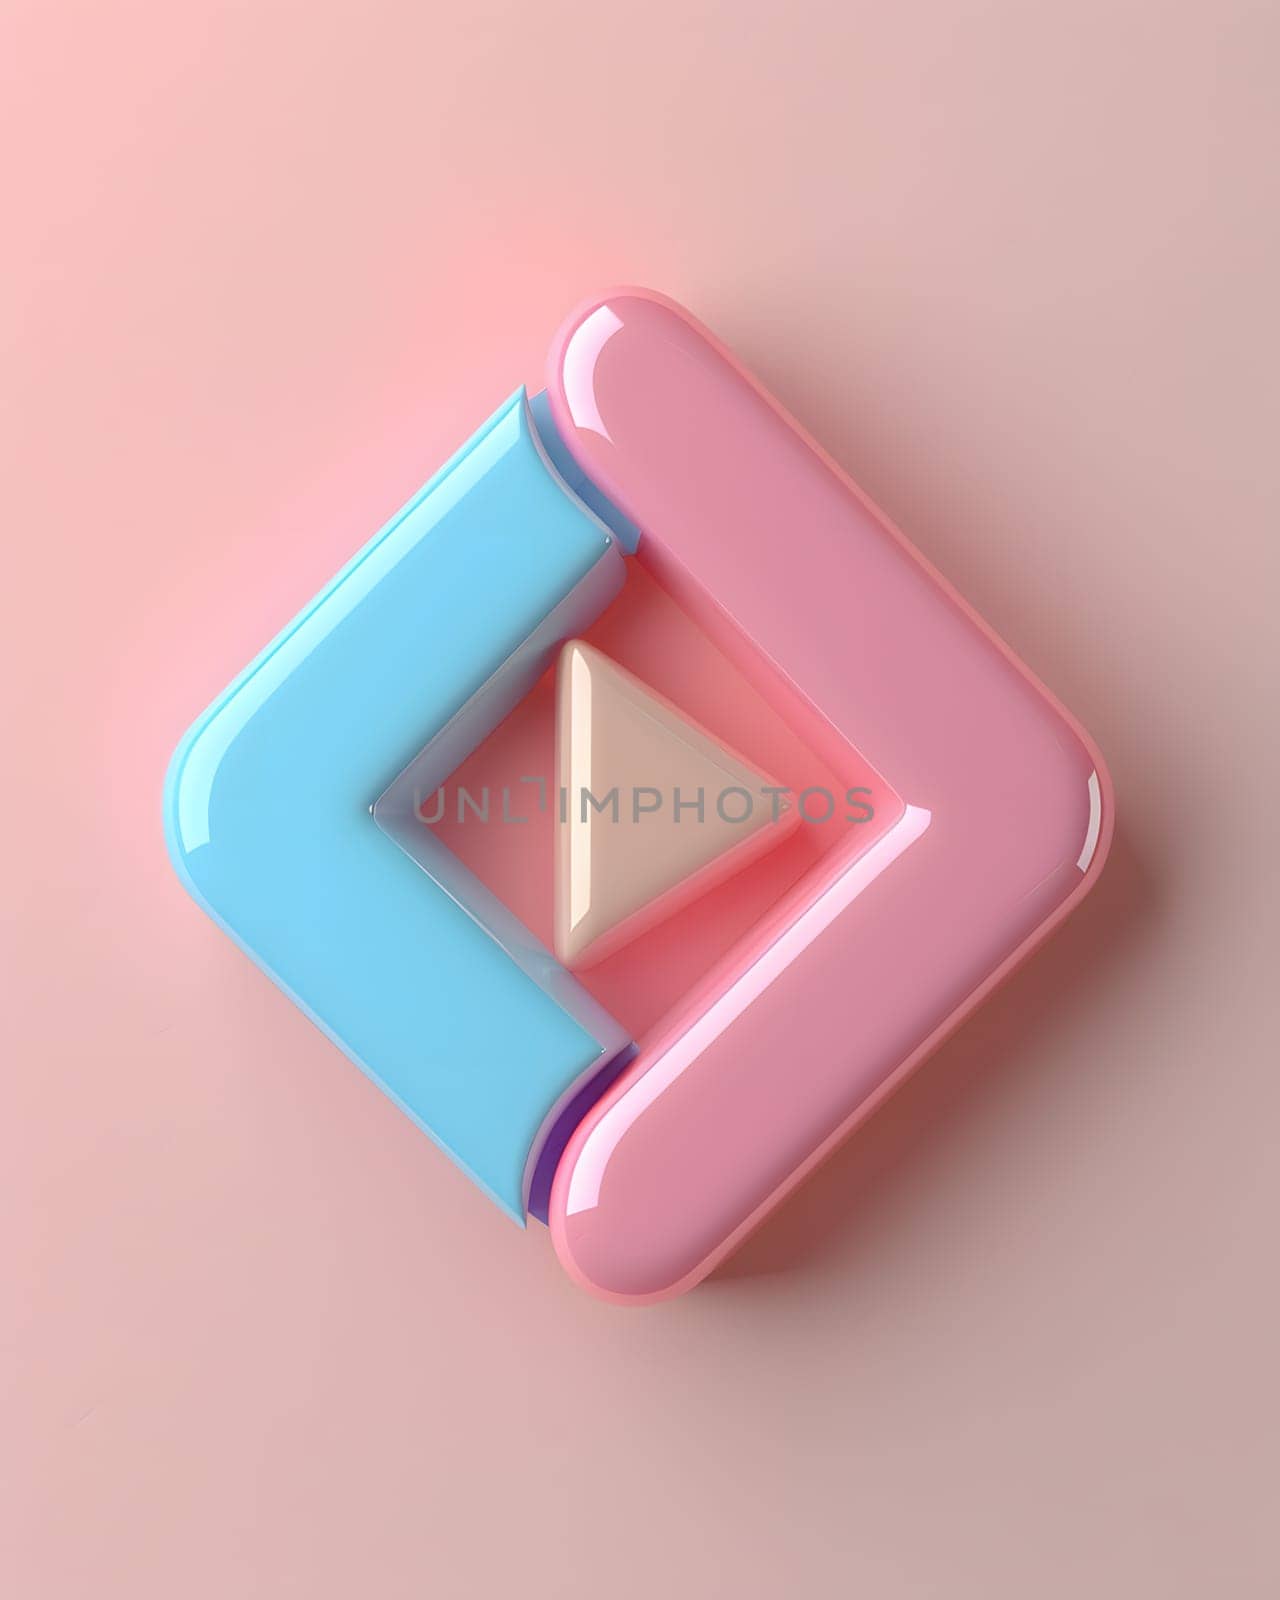 A magenta arrow with an electric blue triangle on a pink background by Nadtochiy